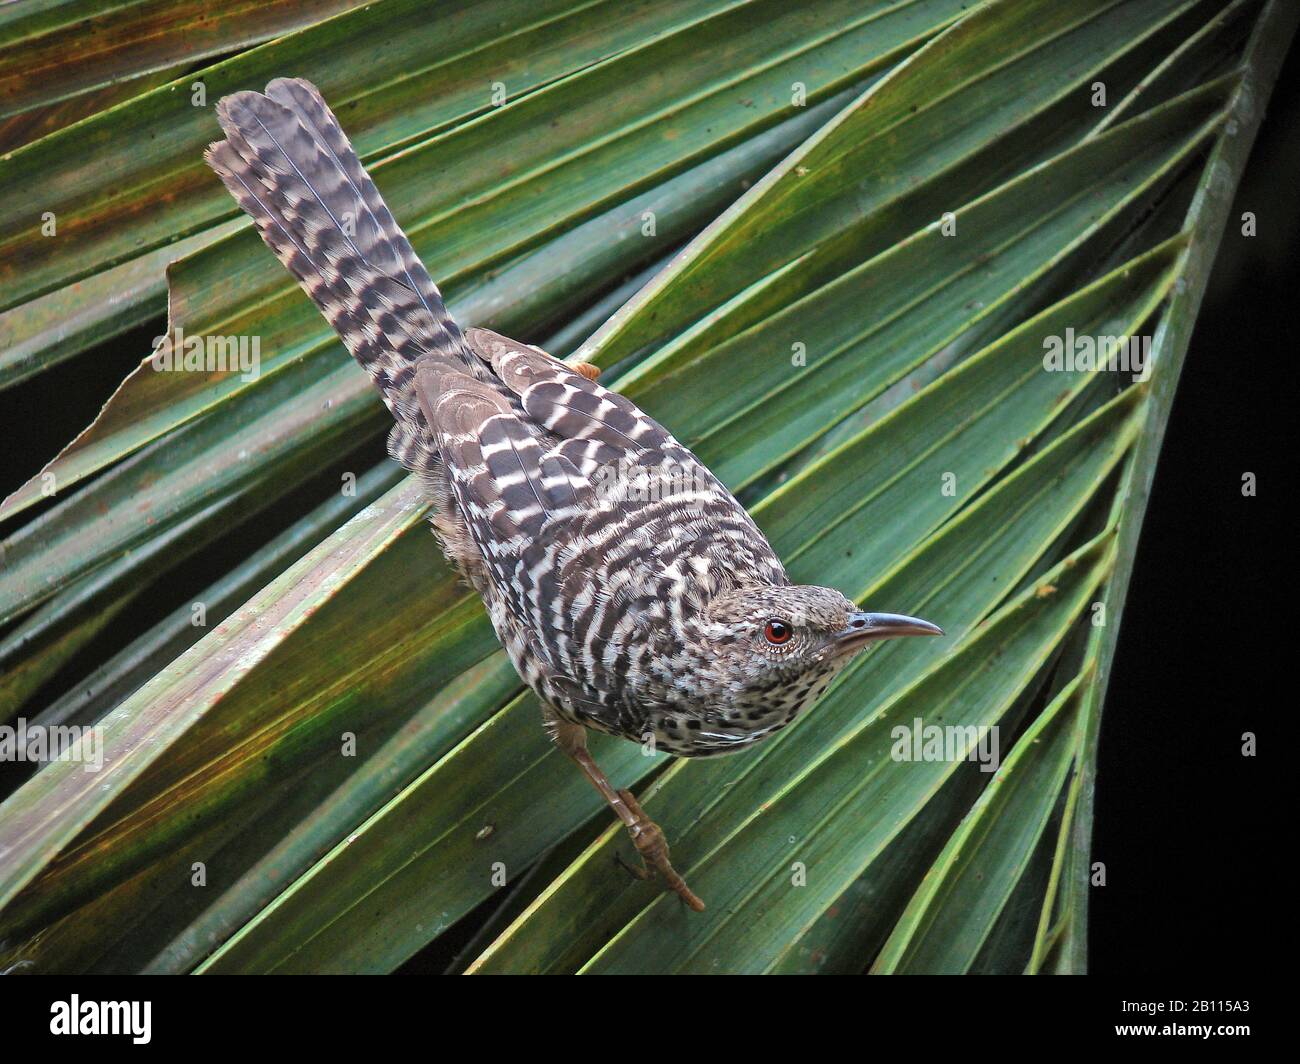 banded-backed wren (Campylorhynchus zonatus), on a palm frond, Colombia Stock Photo